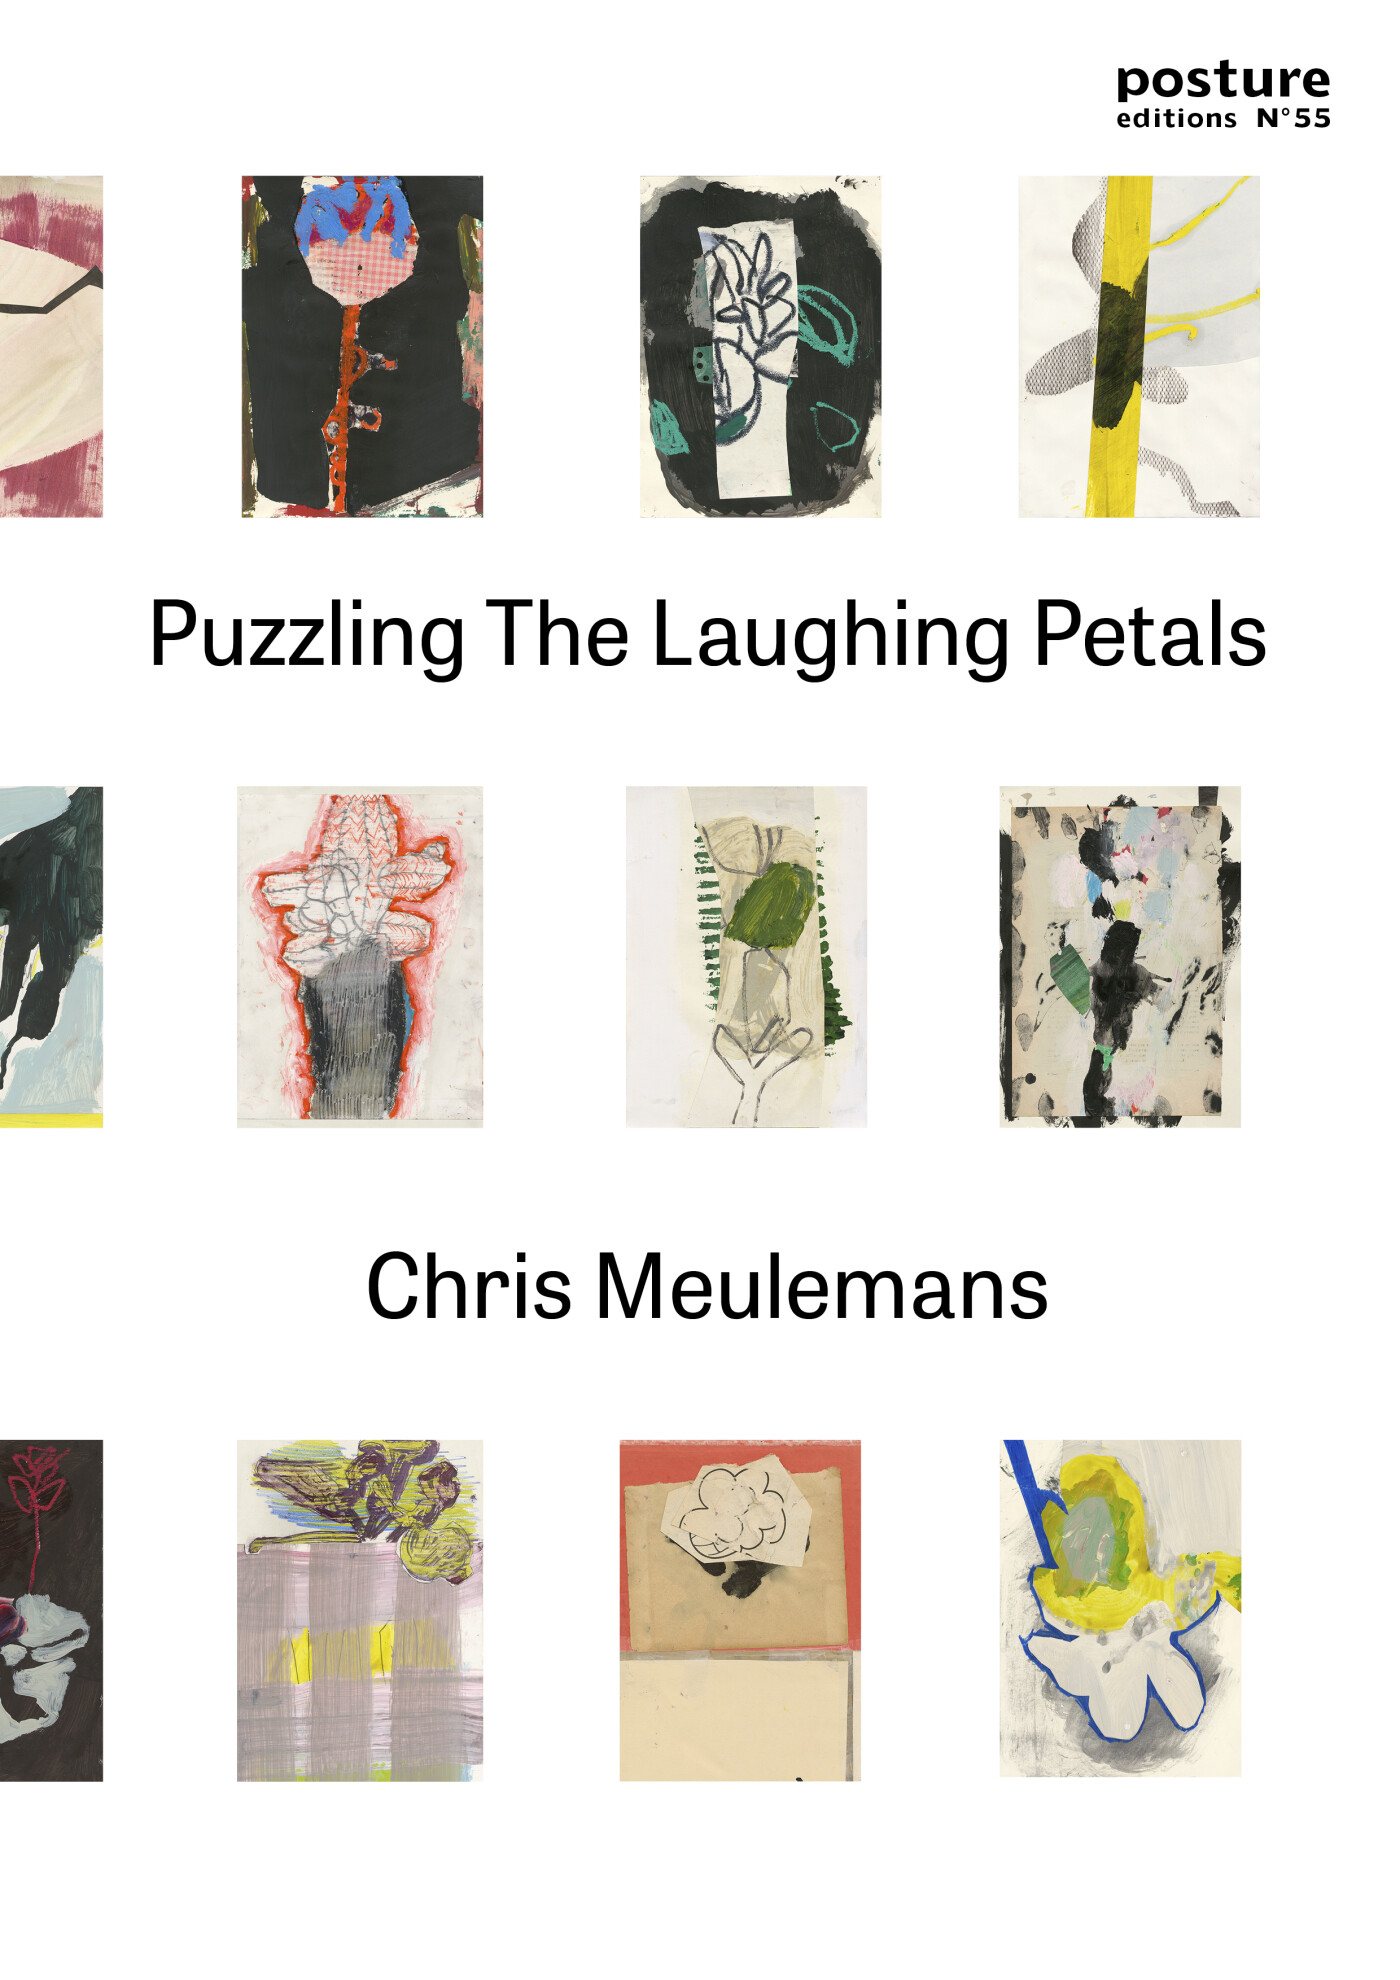 Posture 56: Puzzling The Laughing Petals